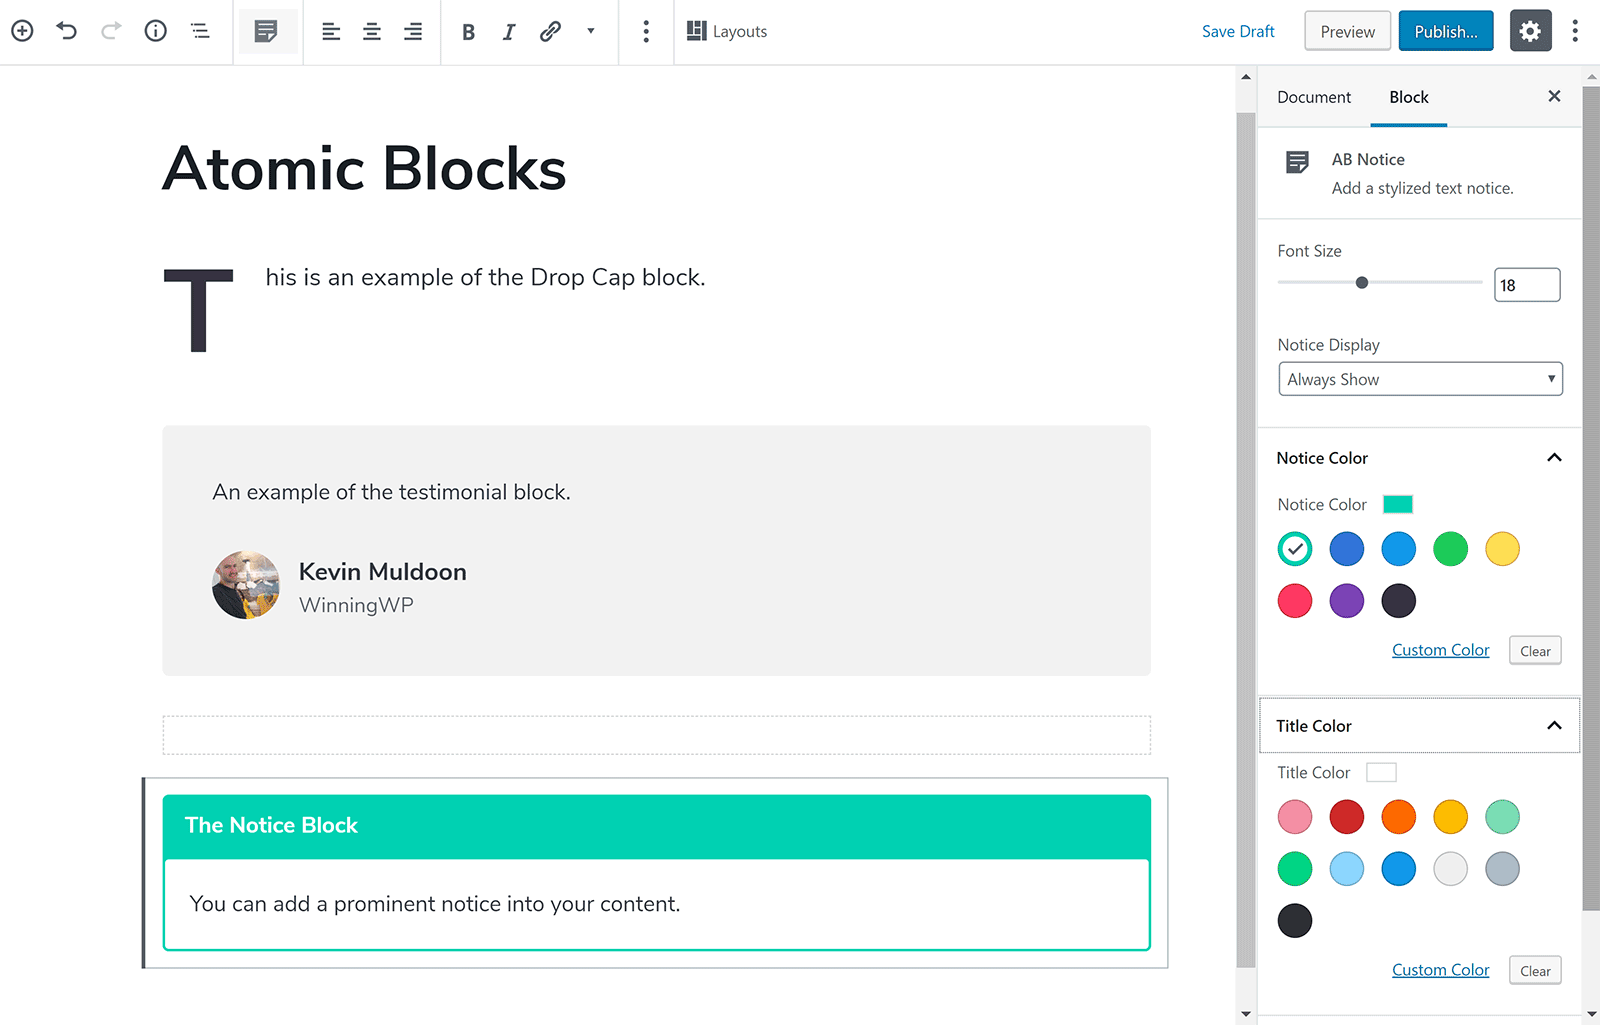 Styling Your Content with Atomic Blocks